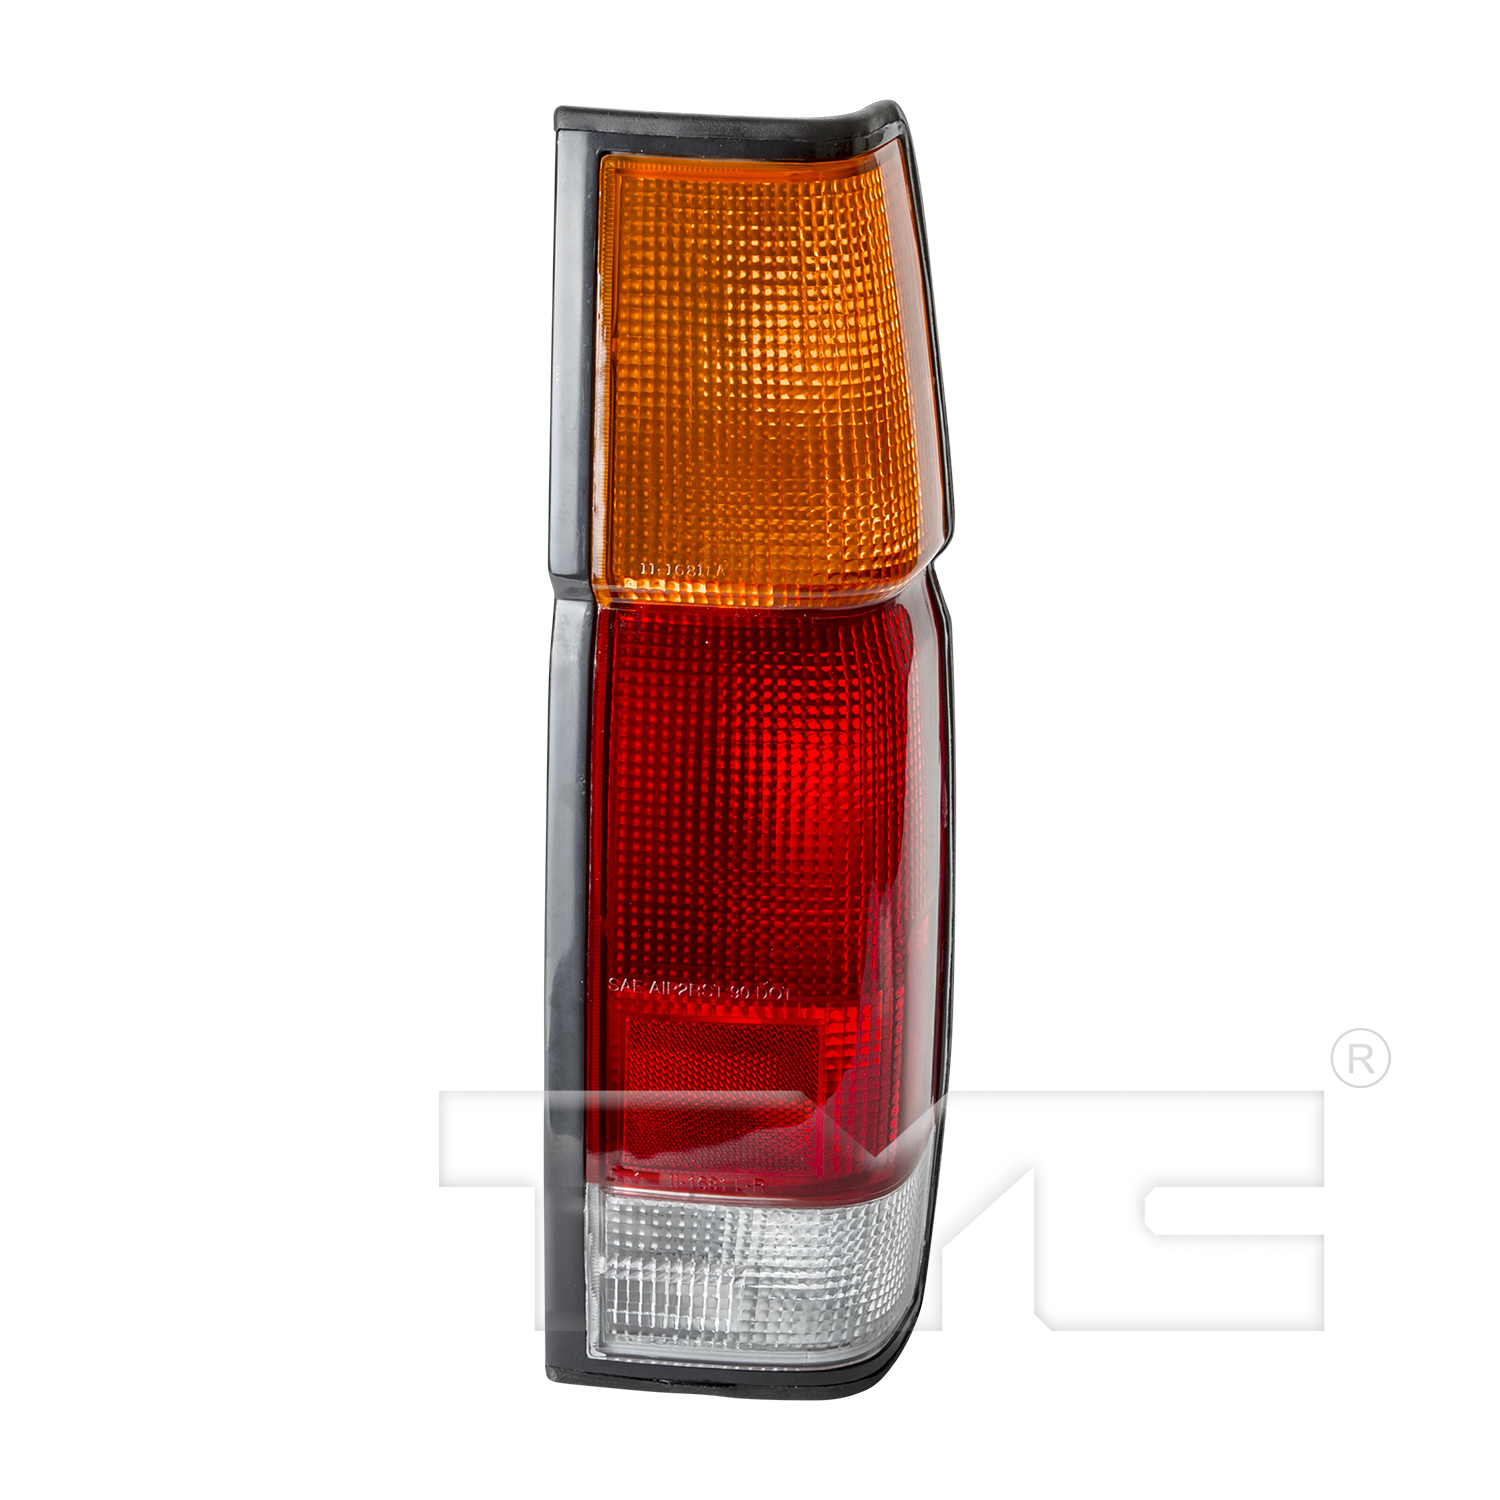 Aftermarket TAILLIGHTS for NISSAN - D21, D21,86-94,RT Taillamp lens